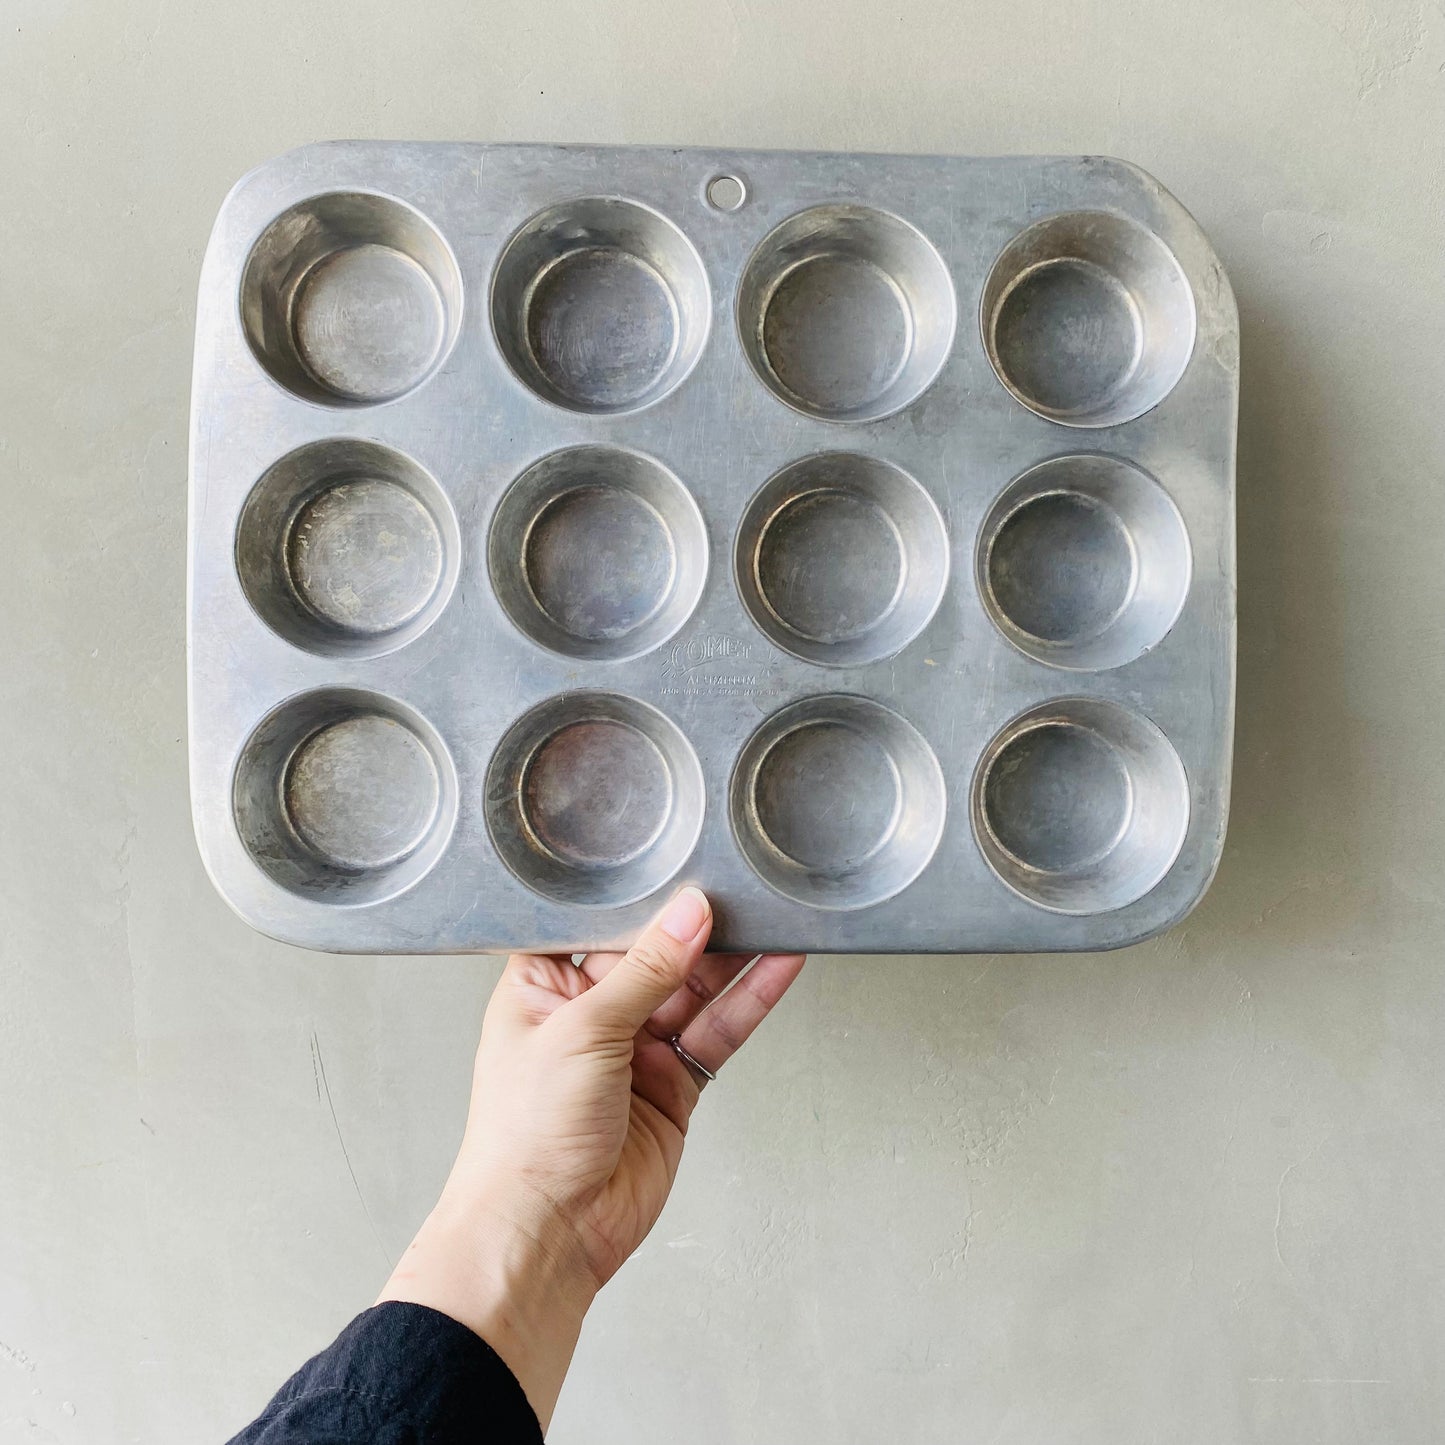 【1950s USA vintage】“COMET” muffin mold